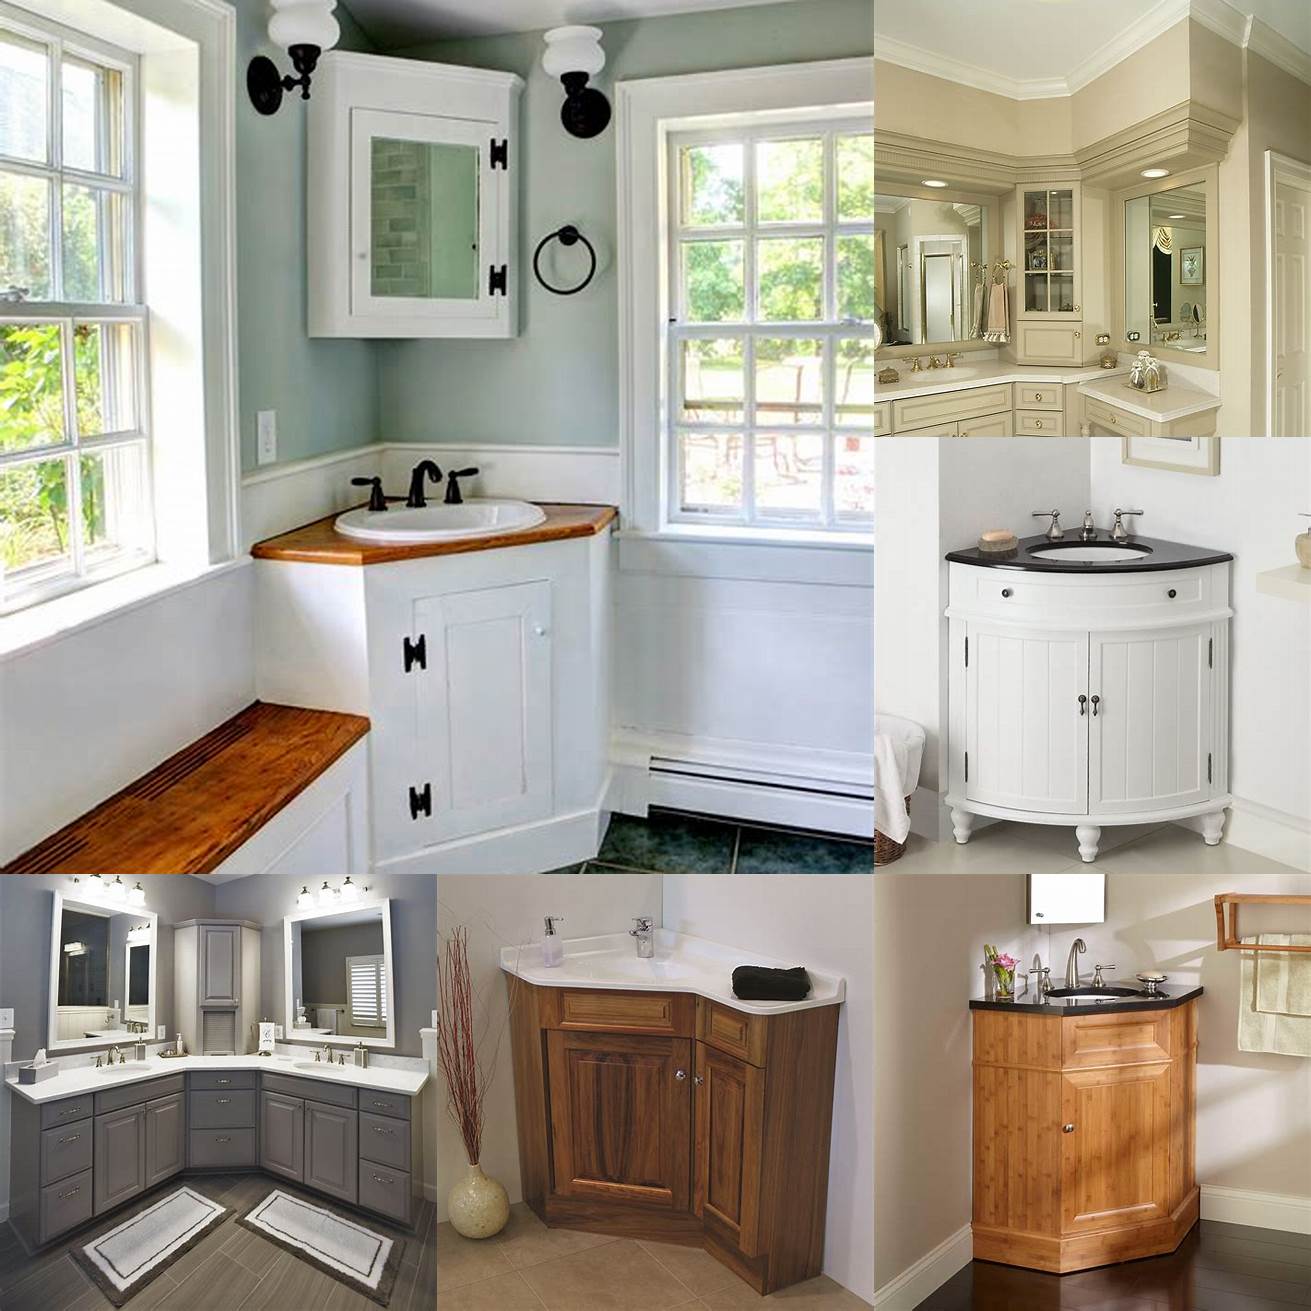 A corner sink vanity with cabinets is great for storing bathroom essentials